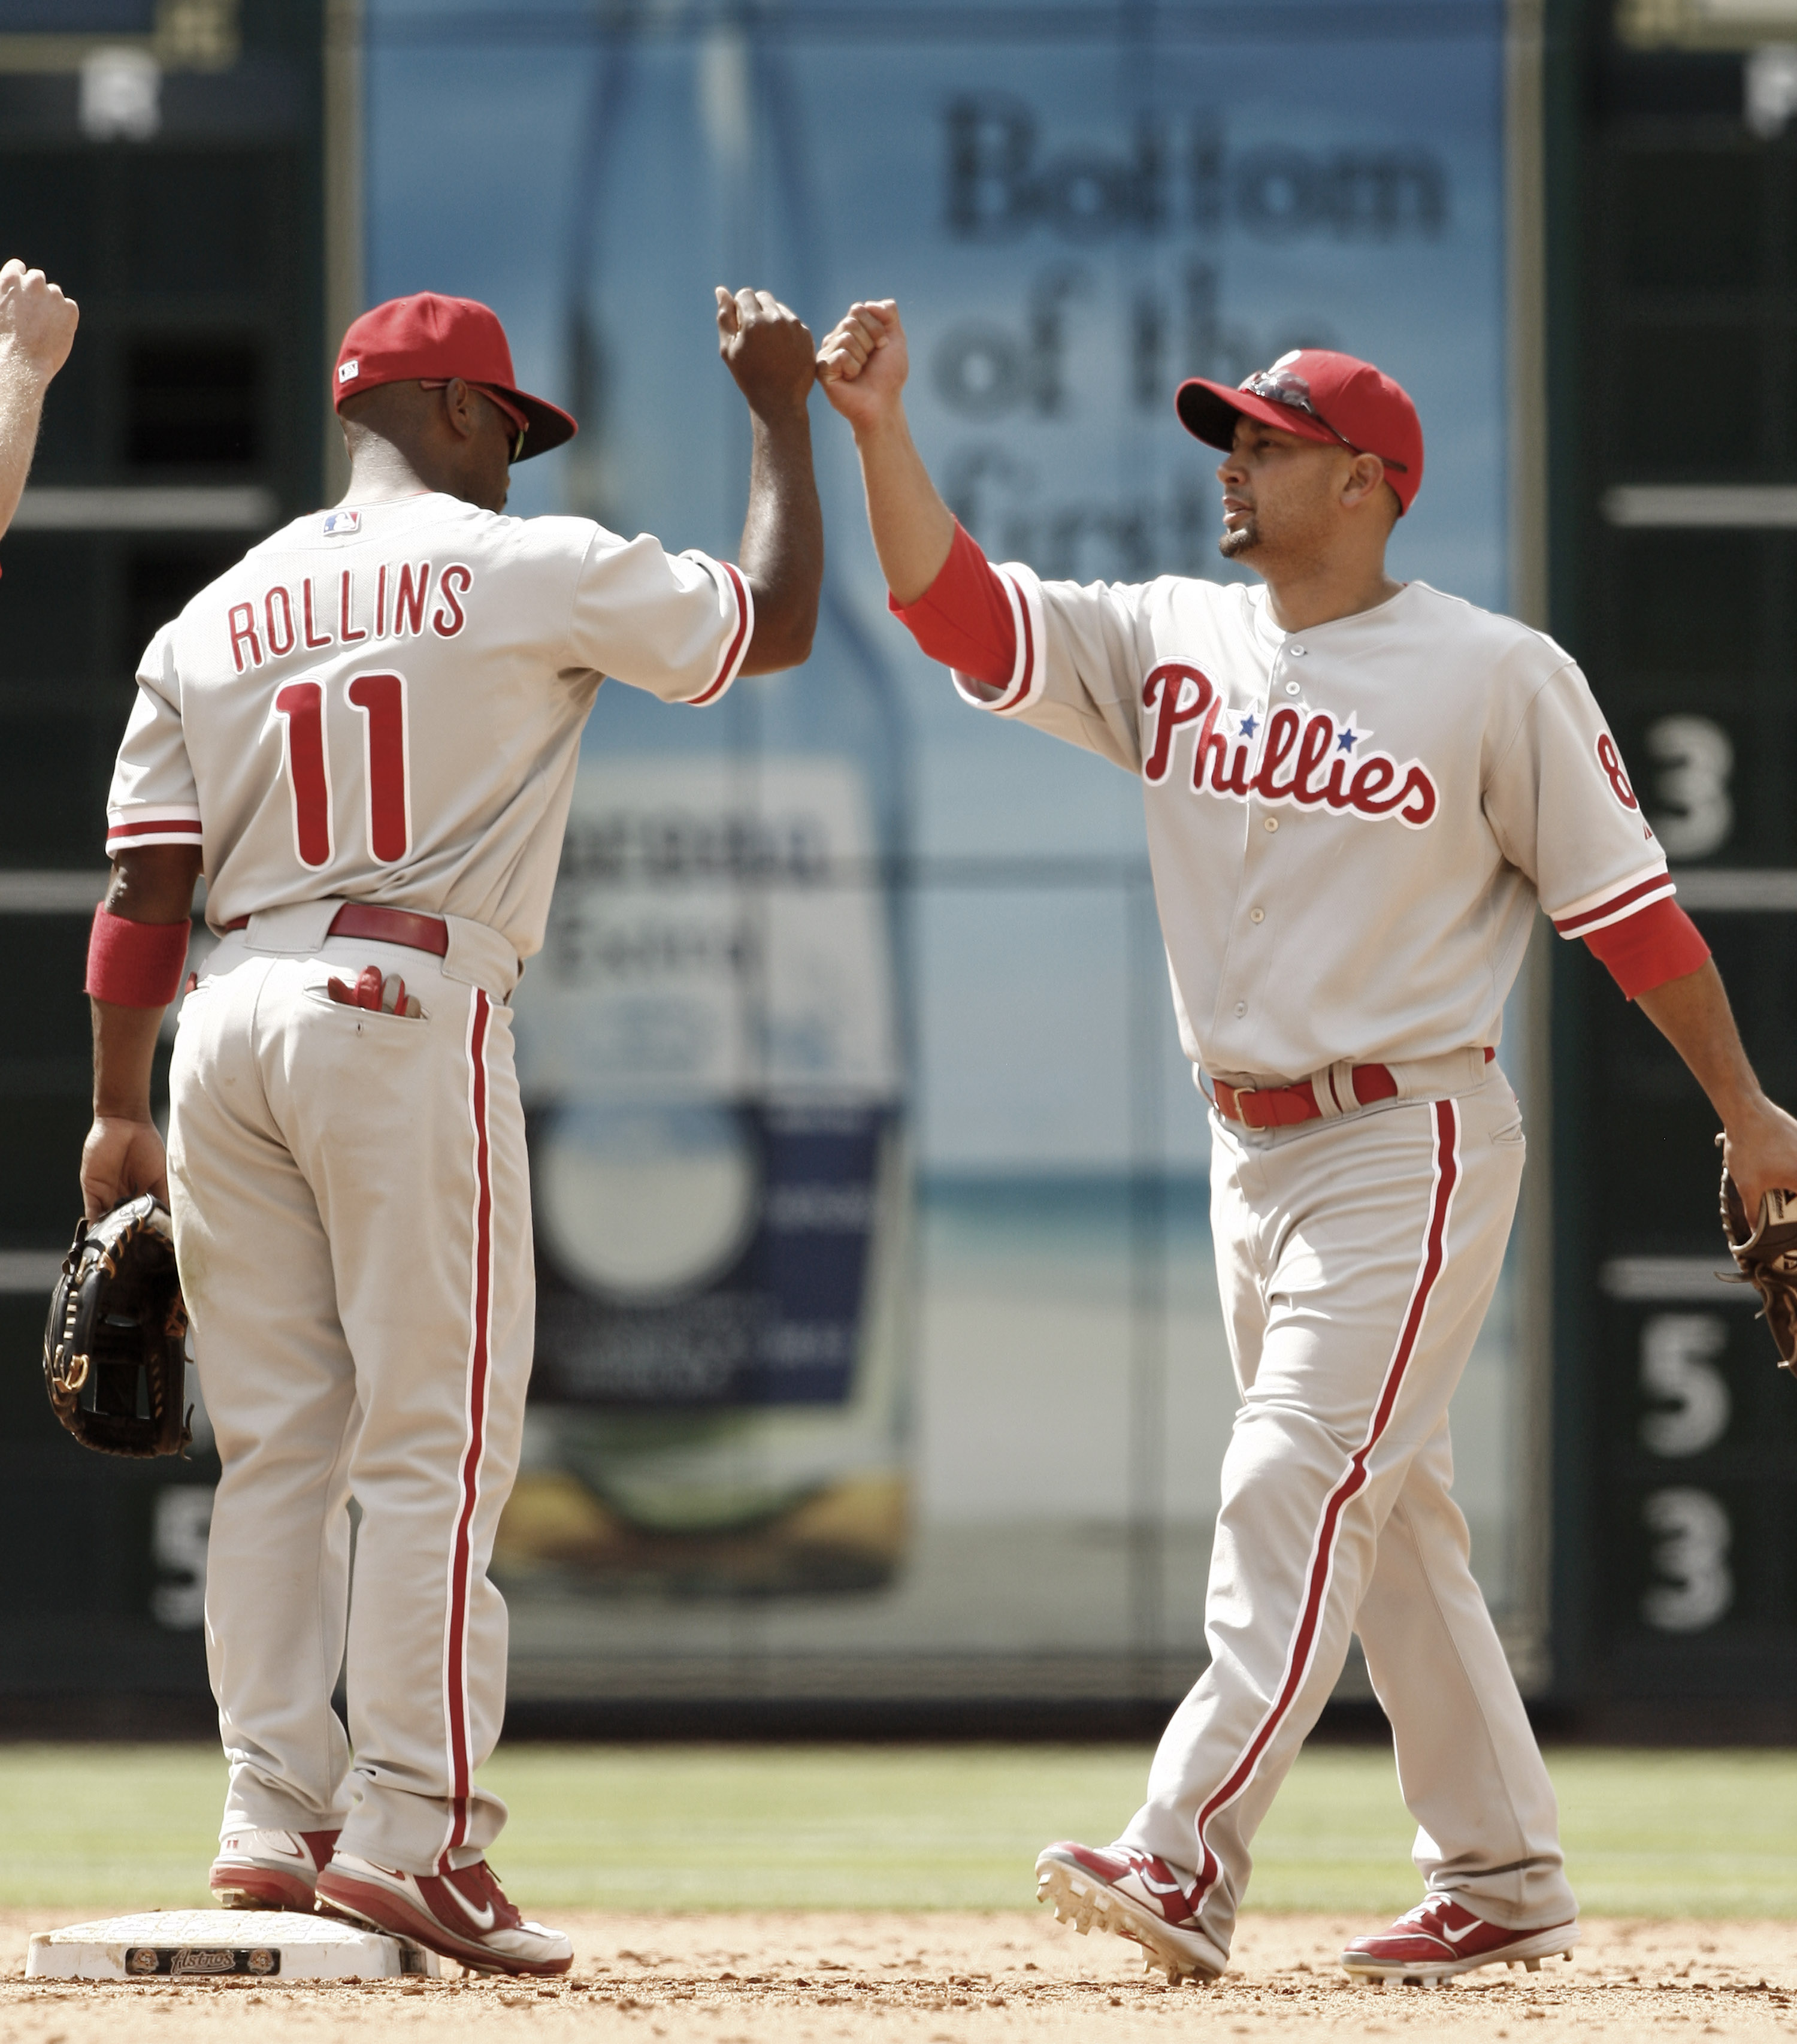 HOUSTON - APRIL 11:  Shane Victorino #8 of the Philadelphia Phillies high fives Jimmy Rollins #11 after defeating the Houston Astros 2-1 at Minute Maid Park on April 11, 2010 in Houston, Texas.  (Photo by Bob Levey/Getty Images)